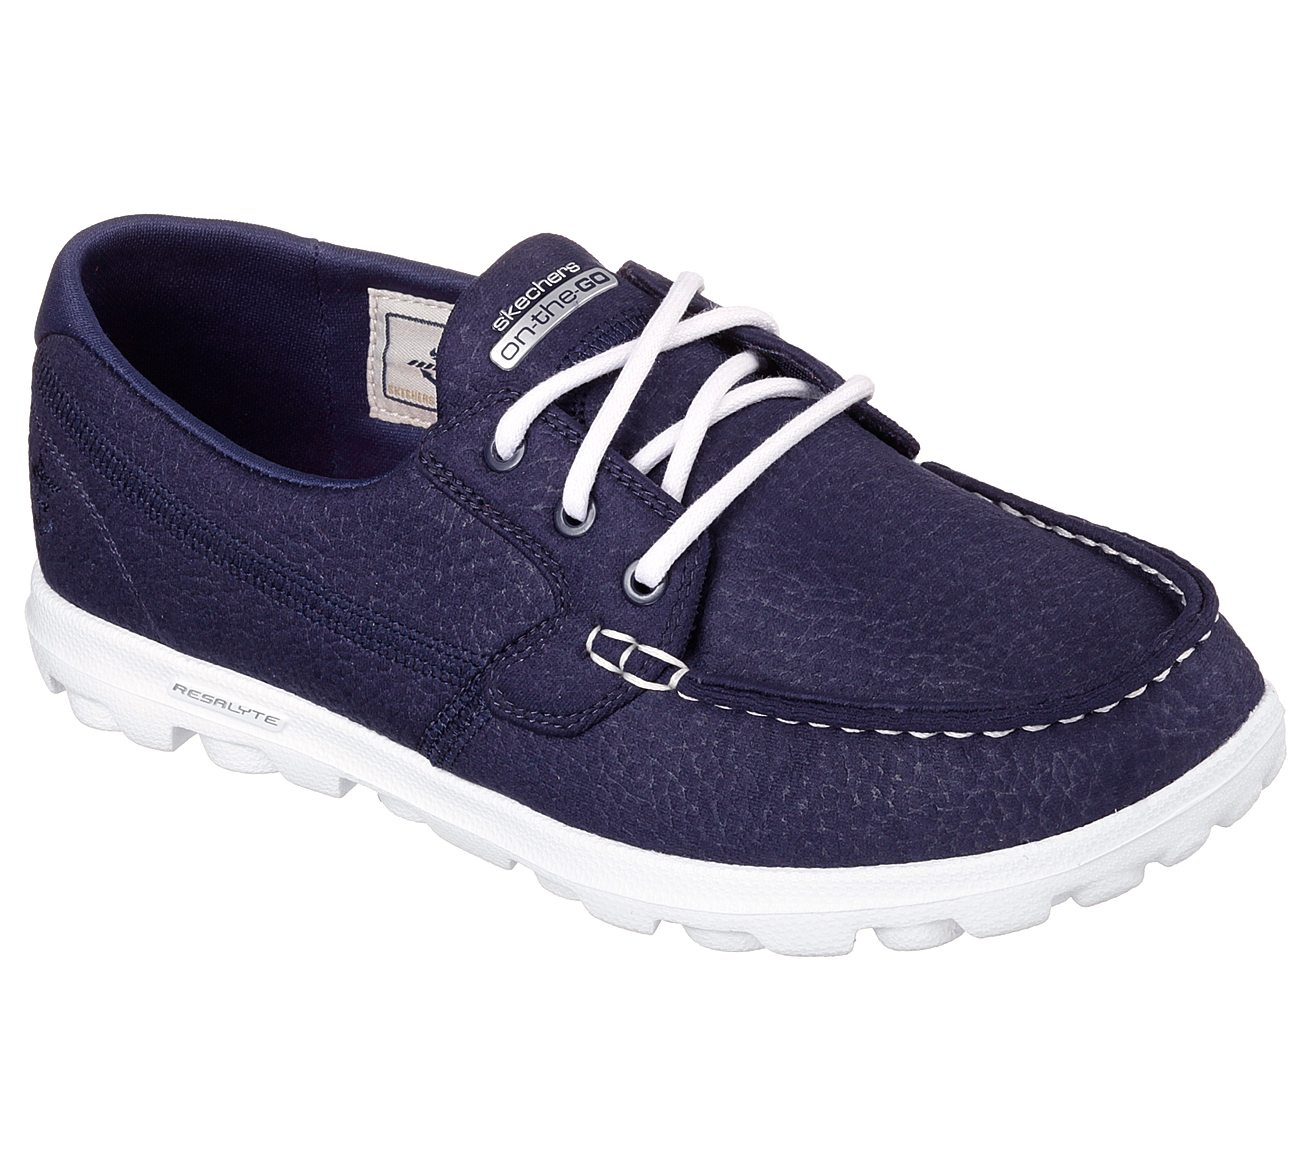 Buy SKECHERS Skechers On the GO - Cruise Boat Shoes Shoes